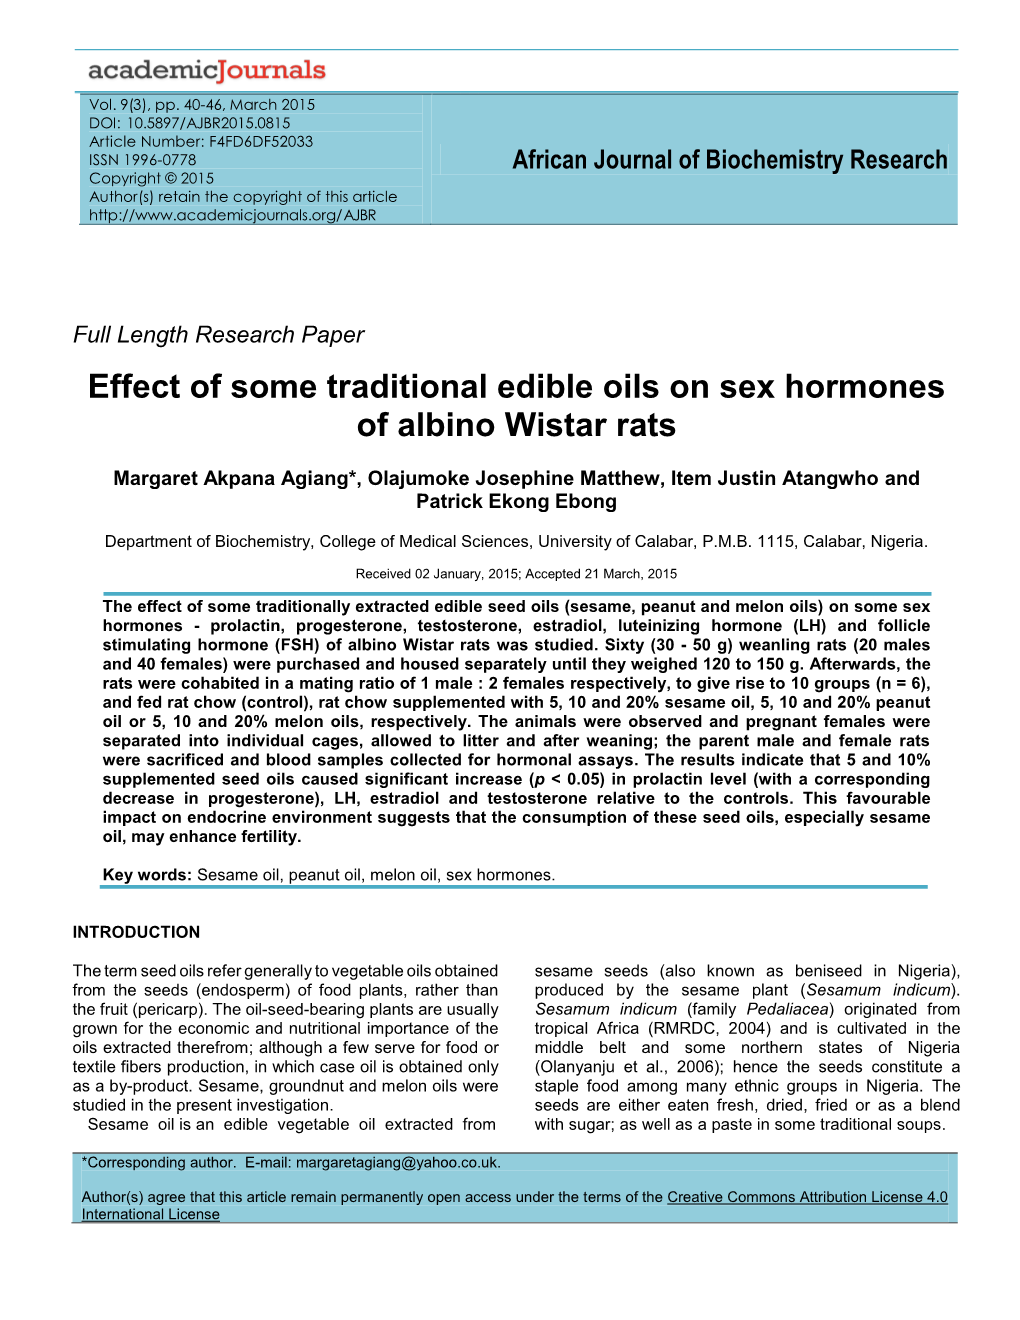 Effect of Some Traditional Edible Oils on Sex Hormones of Albino Wistar Rats